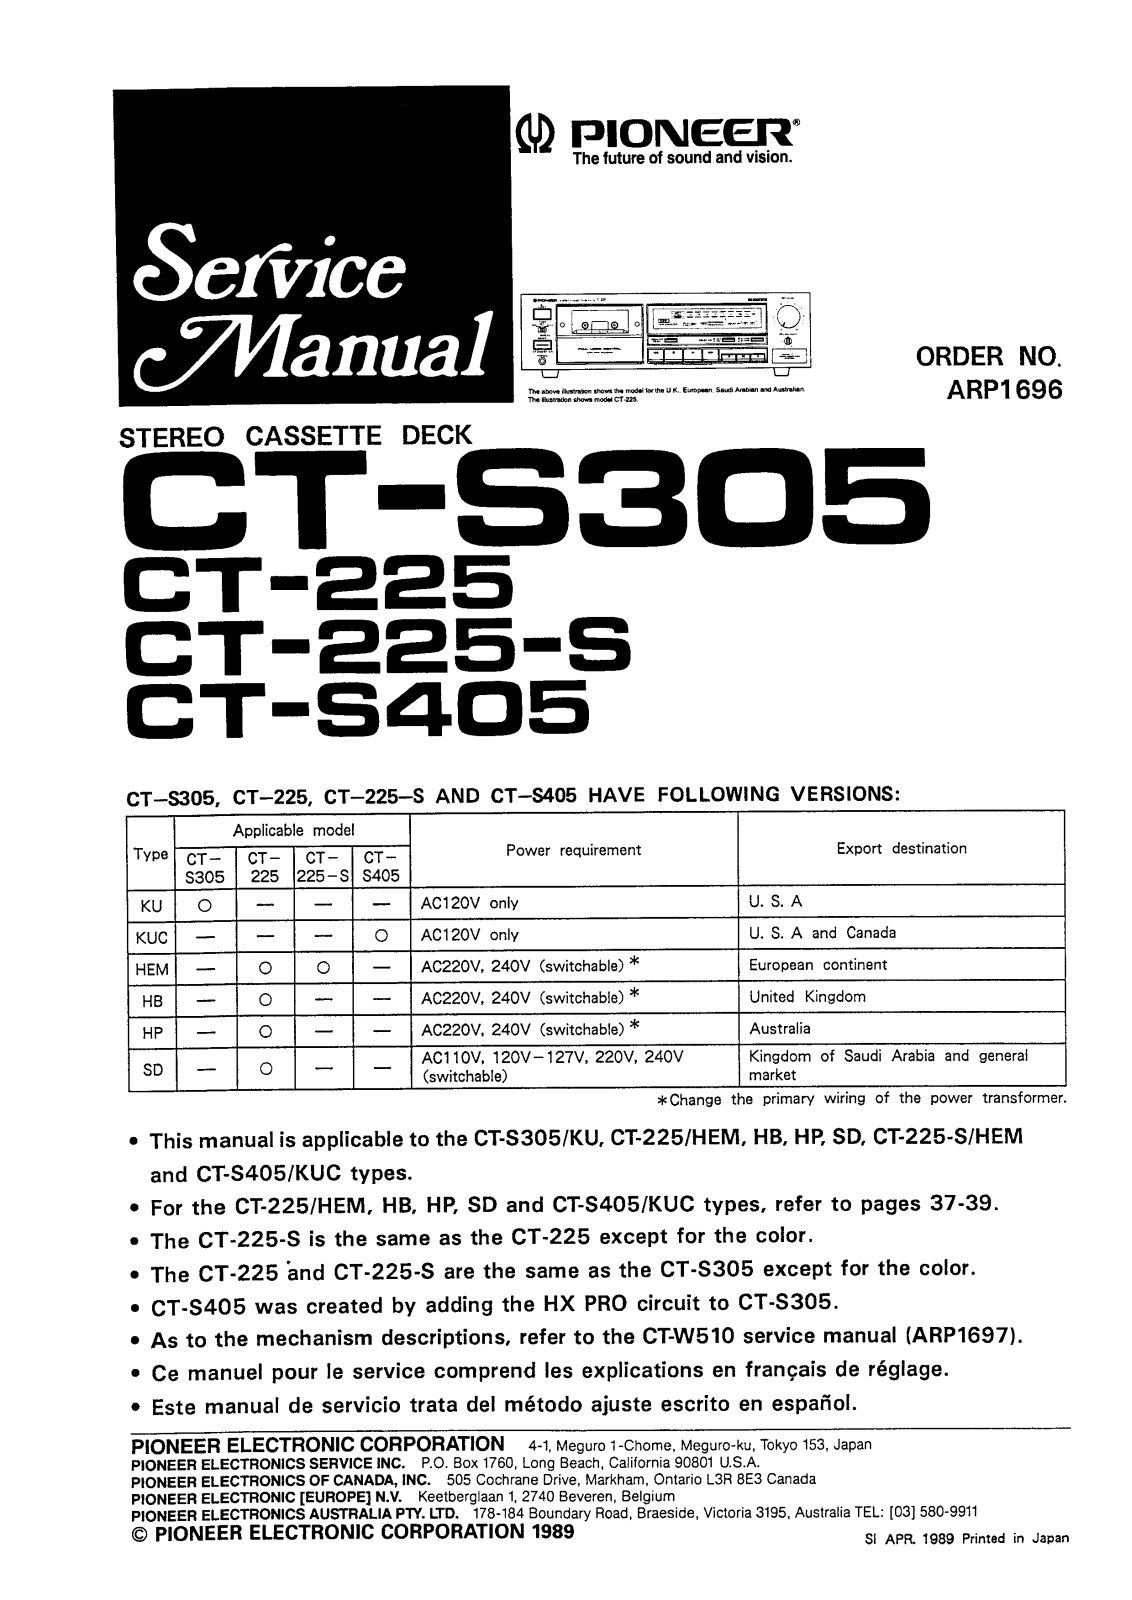 Pioneer CT-225, CT-S305, CT-225-S, CT-S405 Service Manual